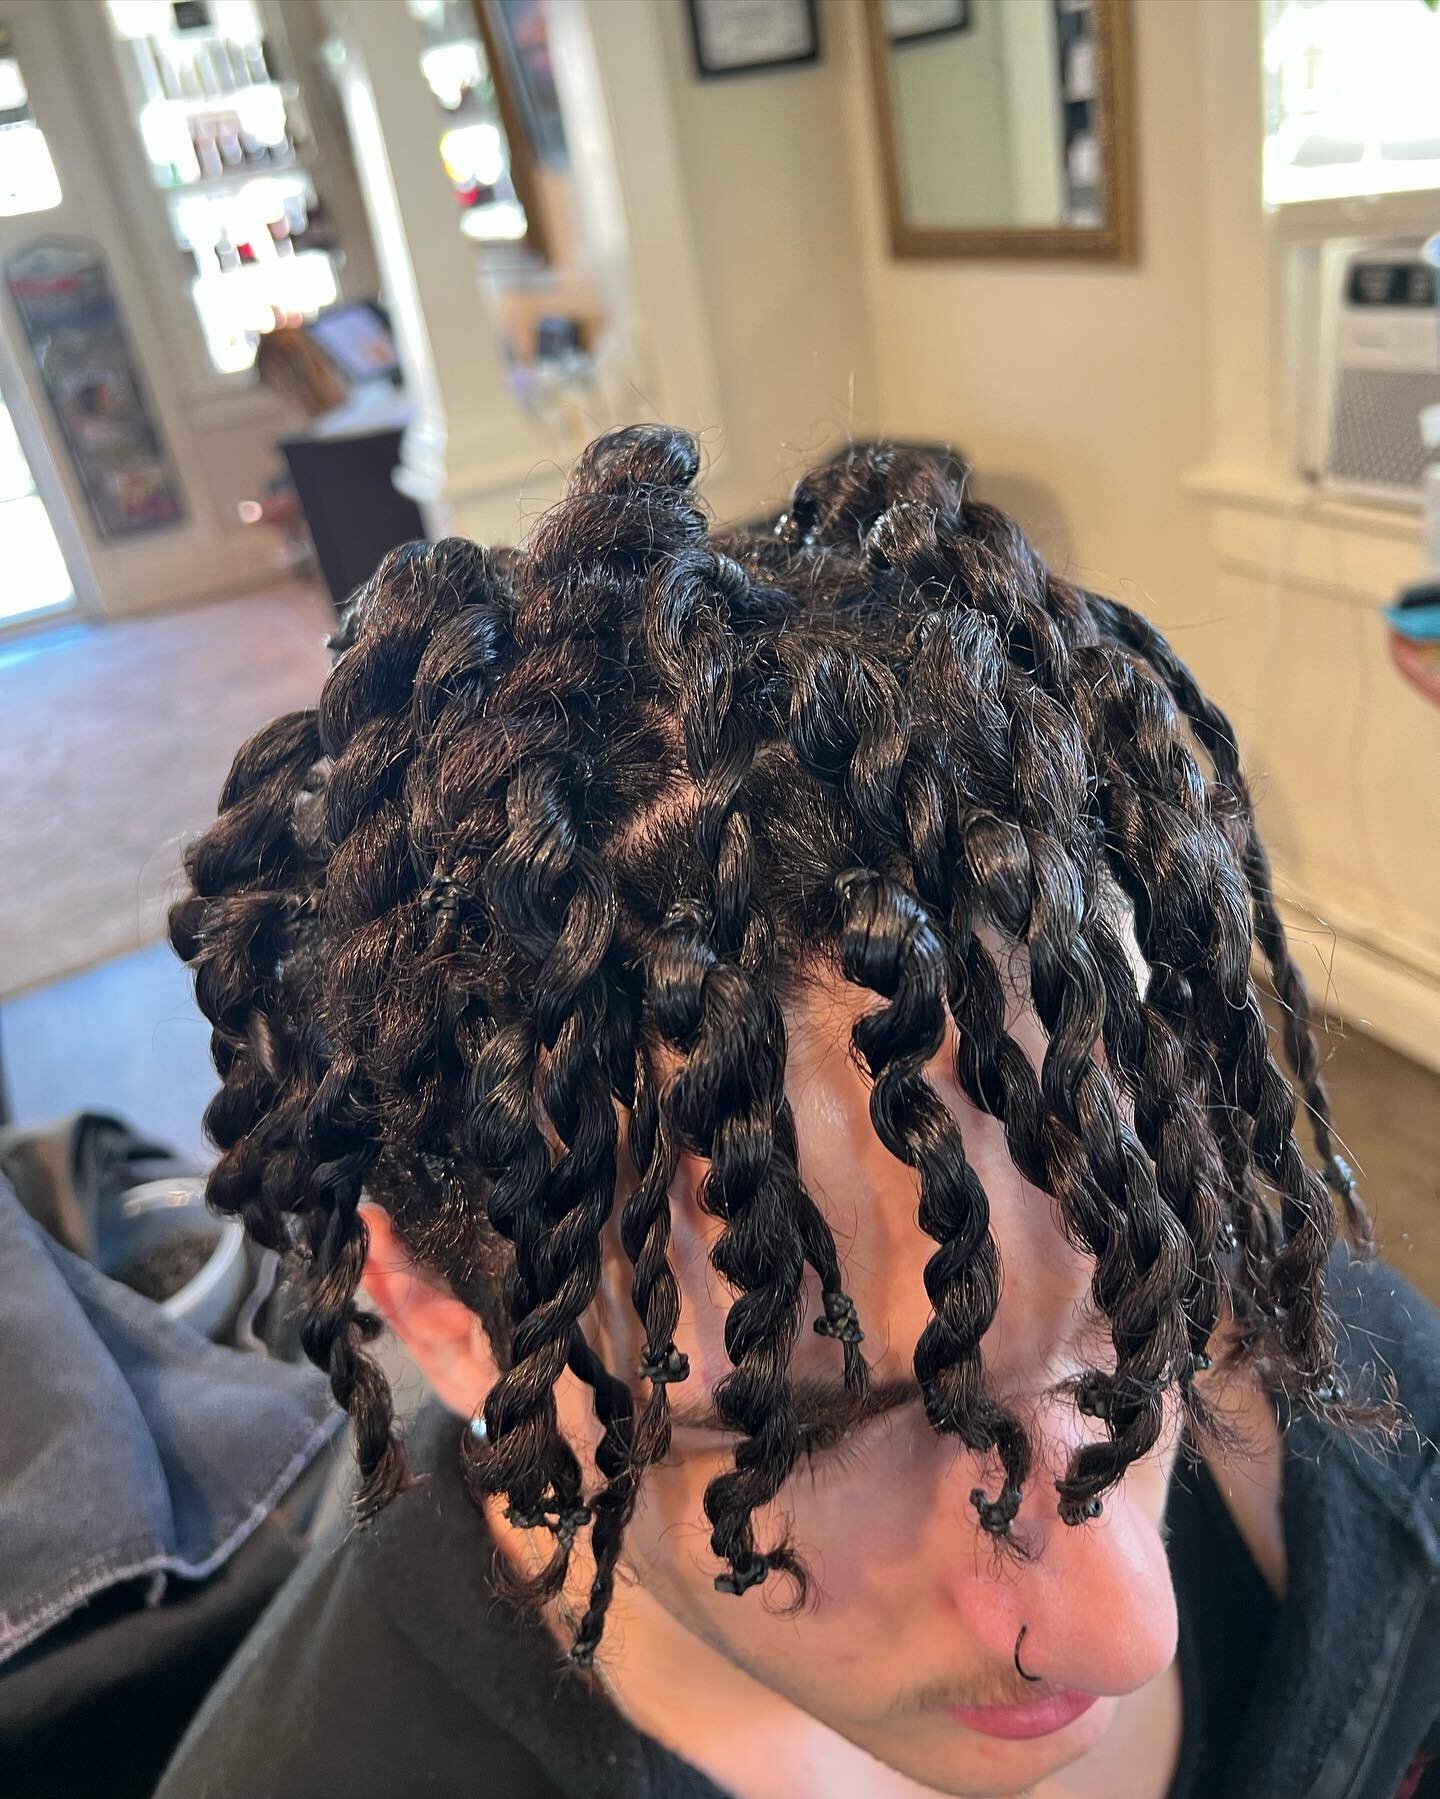 Lynn did these beautiful twists on a young dude today. Way to go!